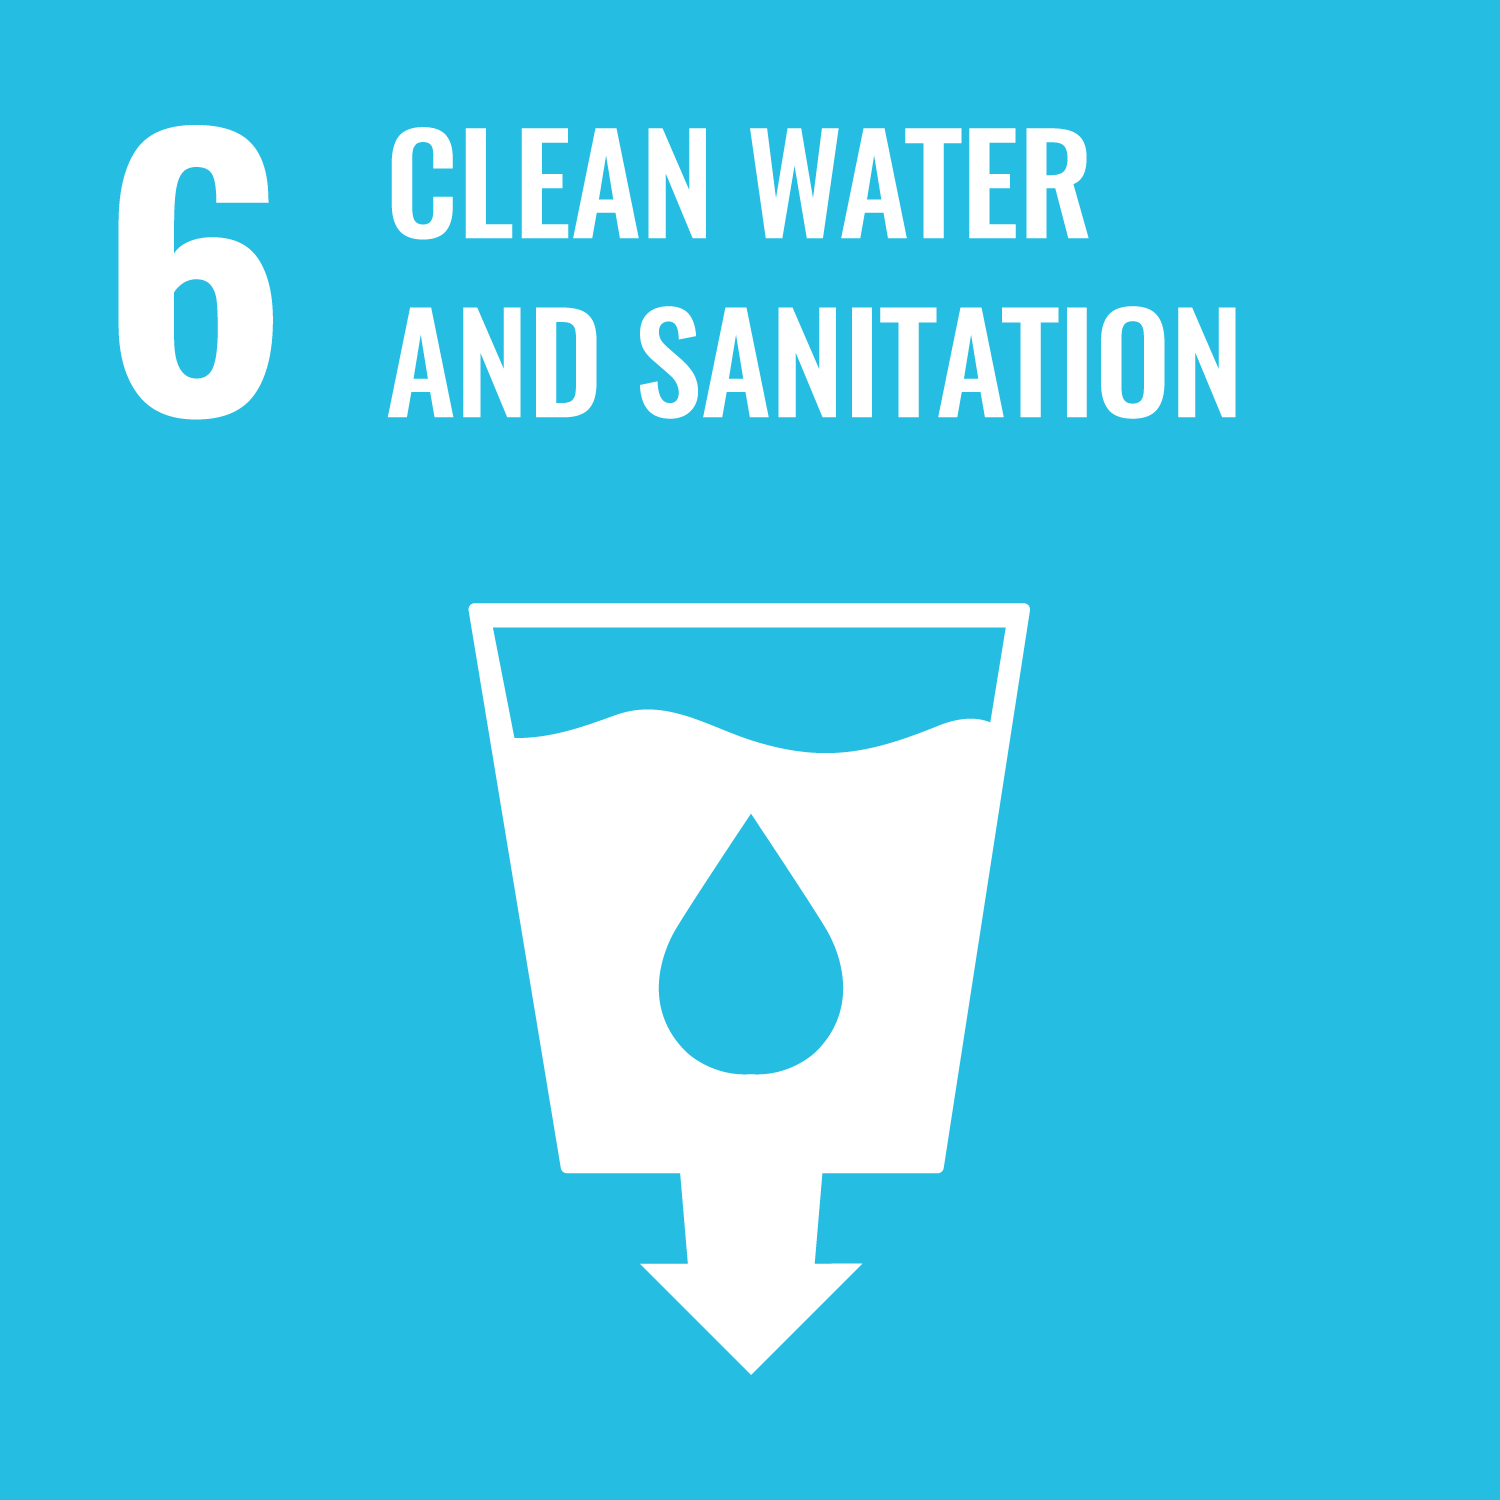 SDG Graphic for Clean Water and Sanitation